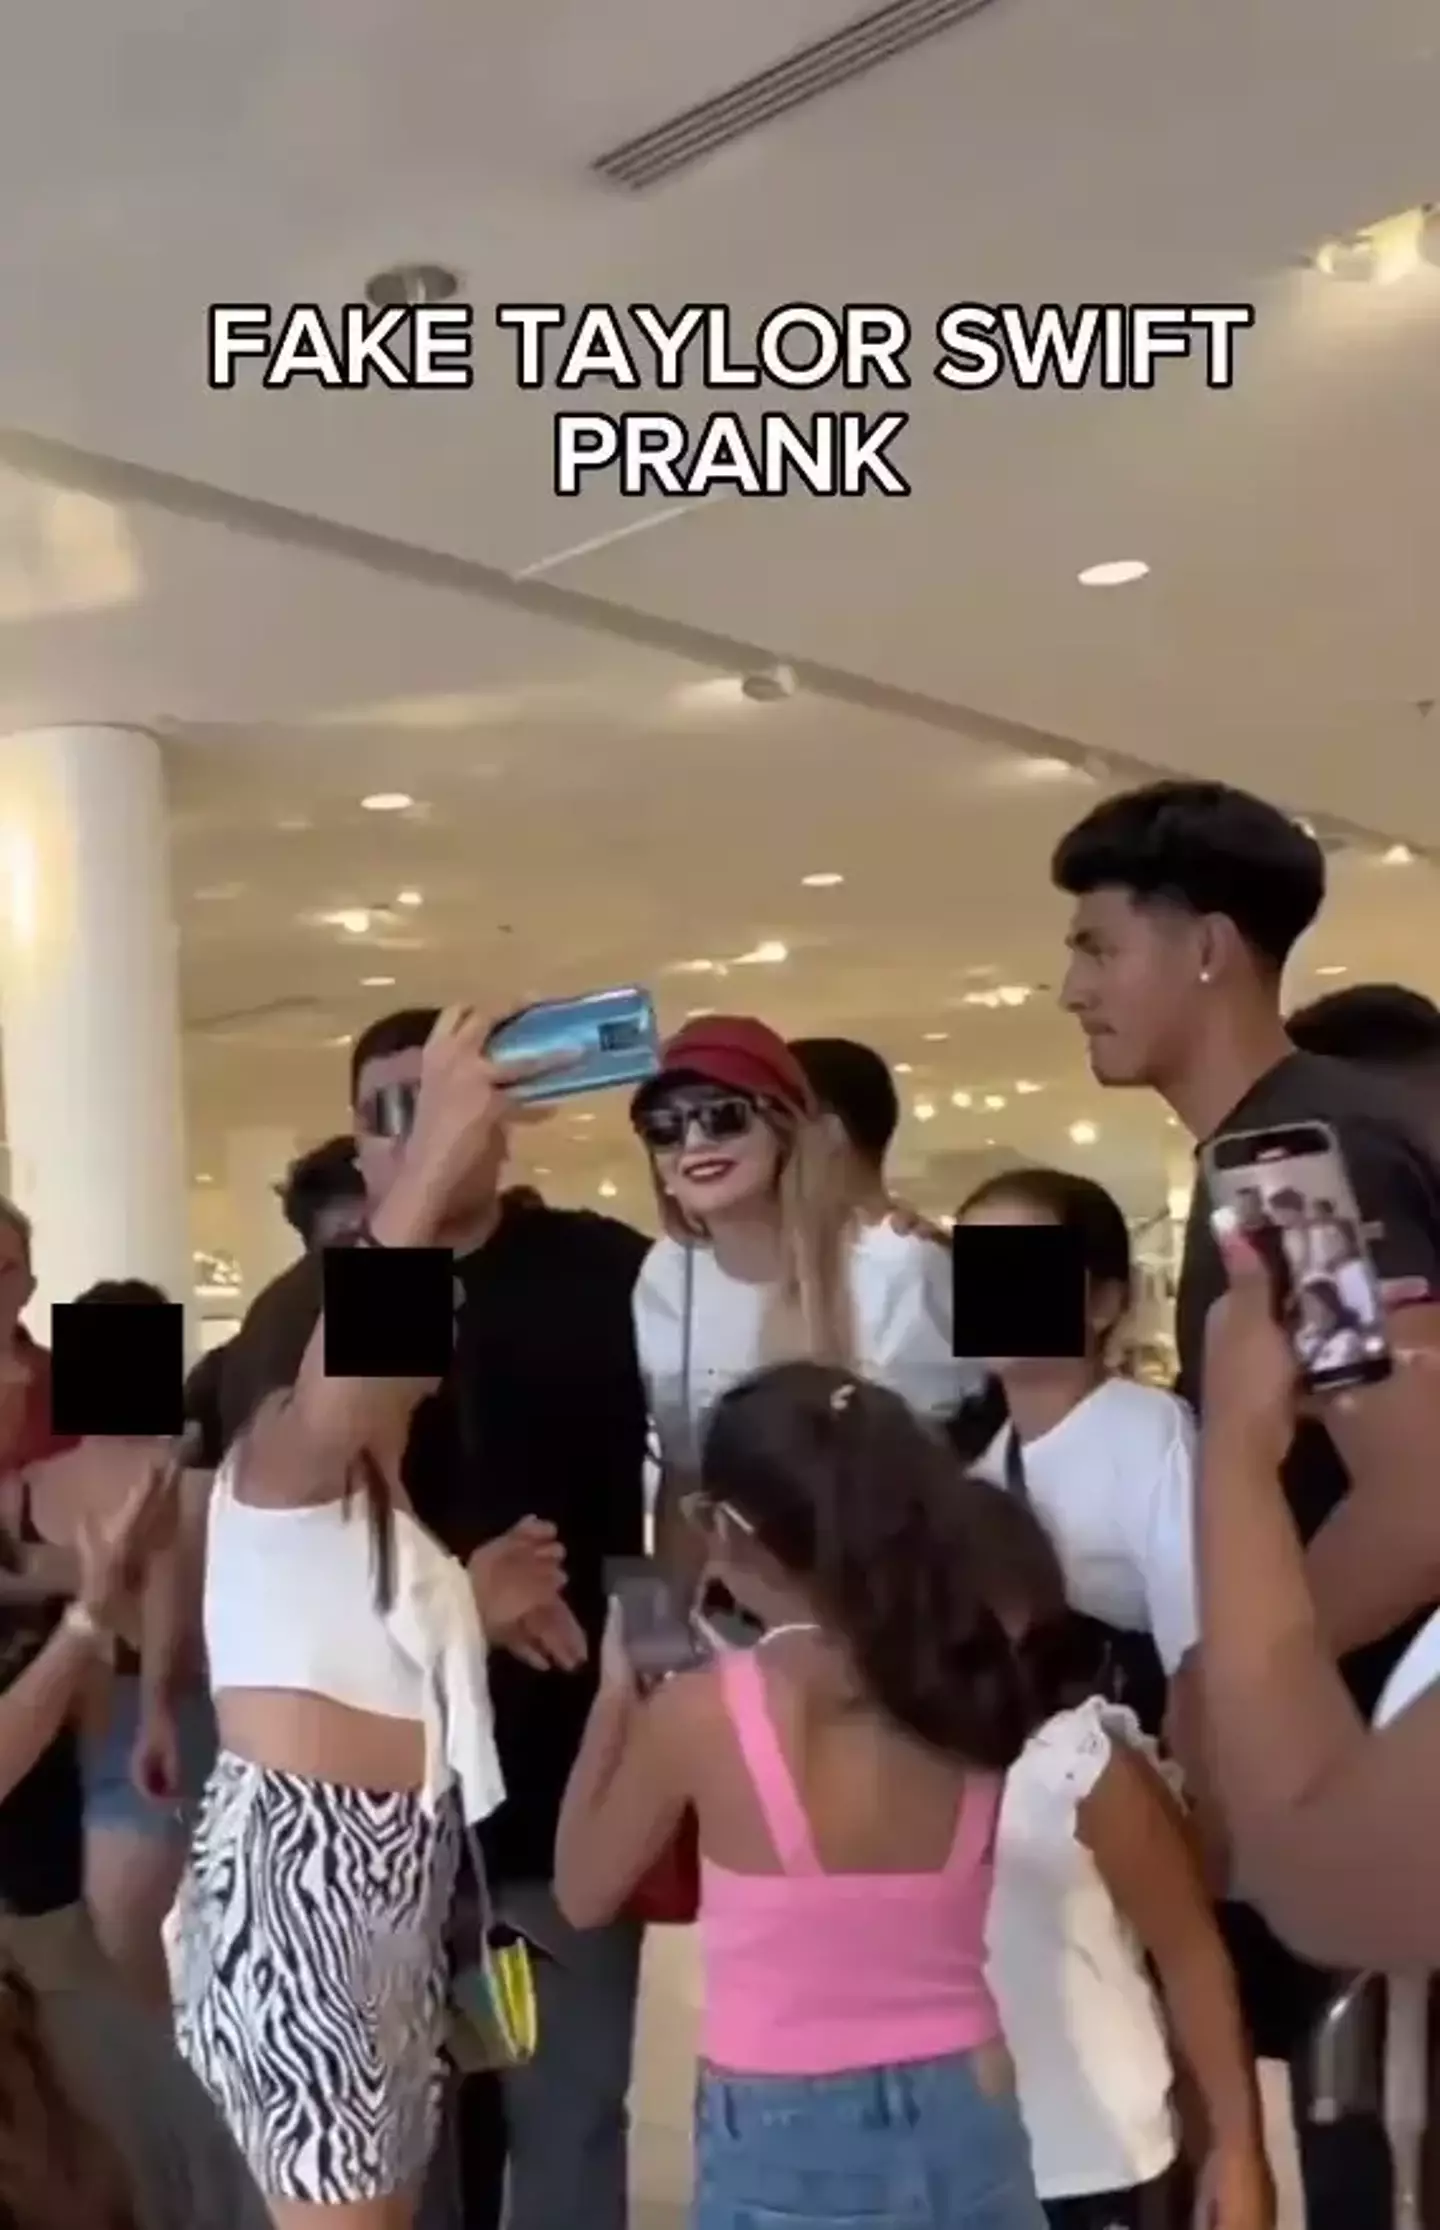 The prank happened on the same weekend Swift was swarmed by fans.